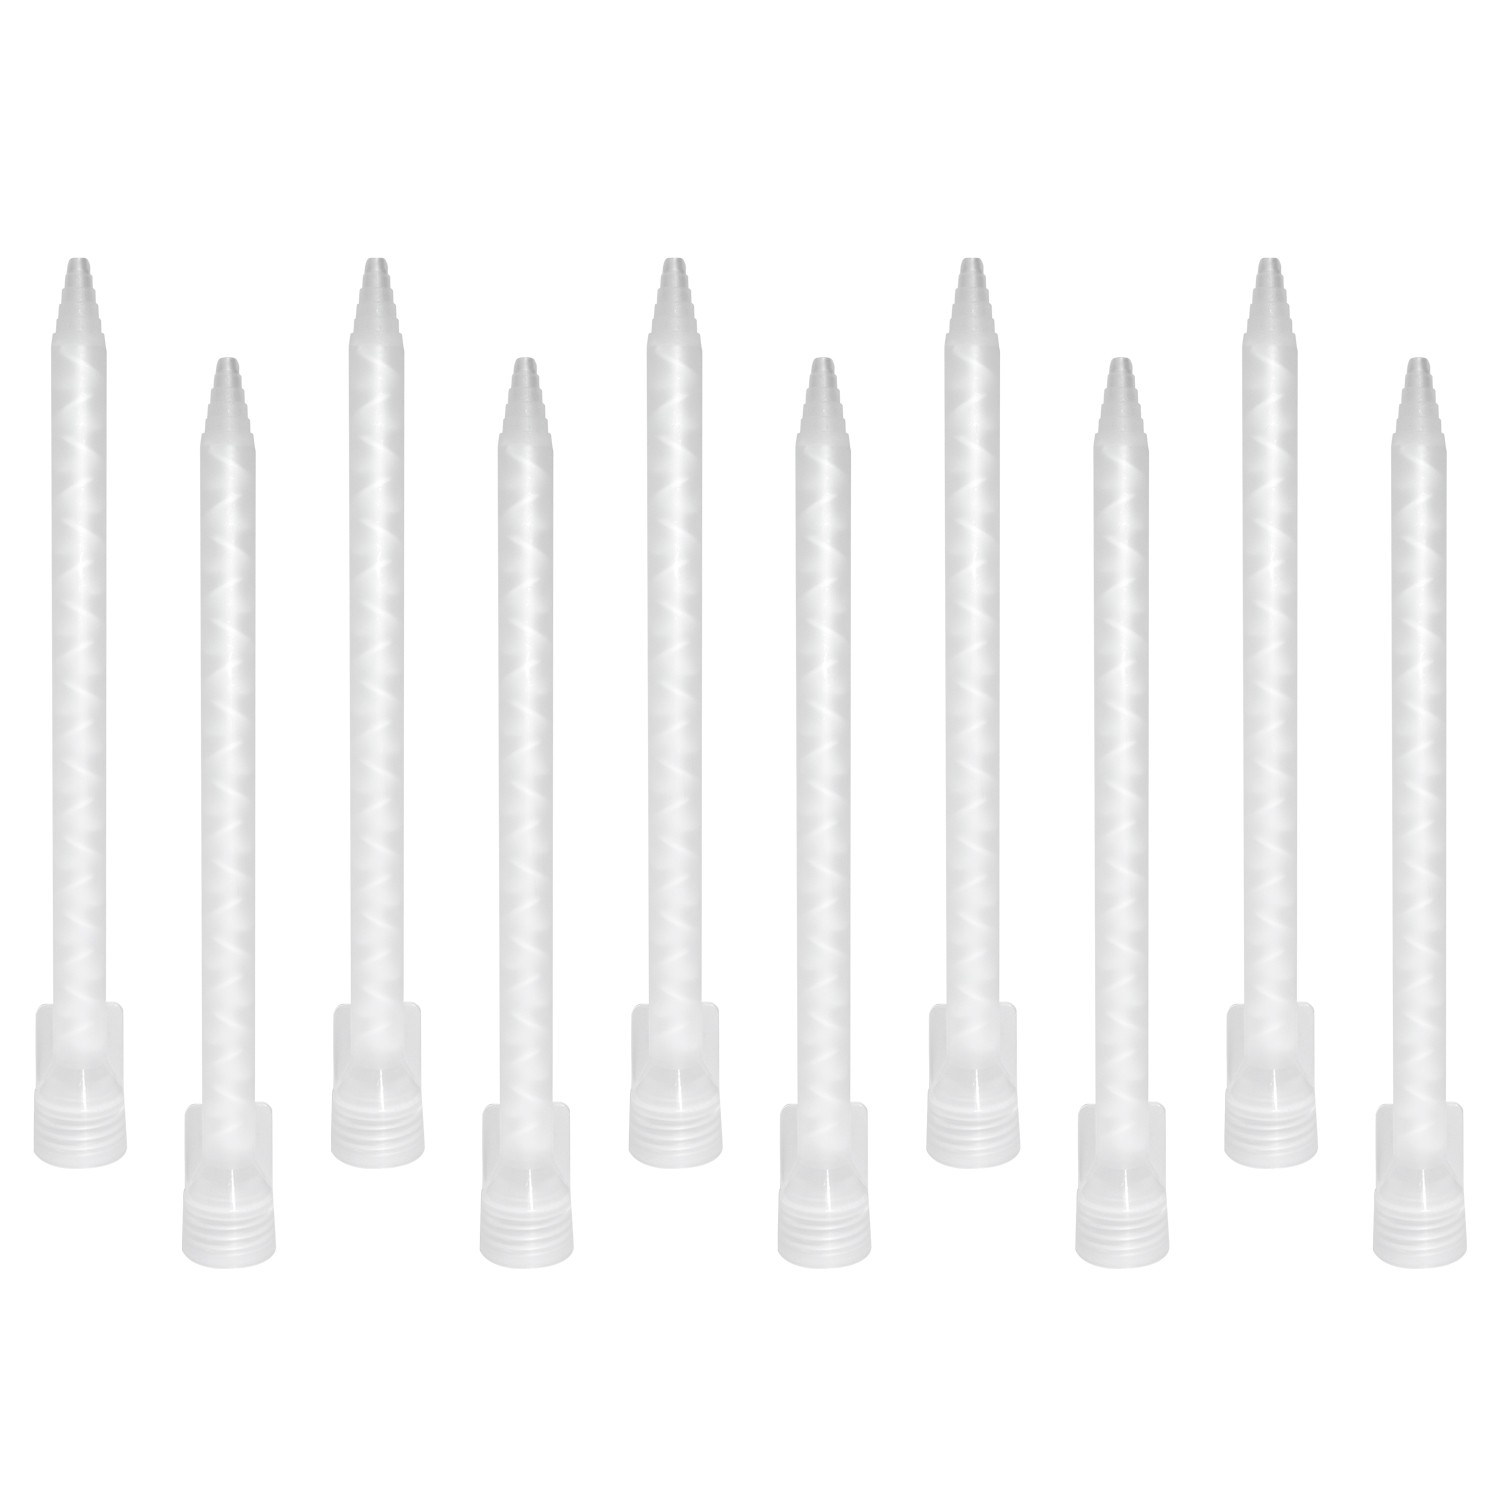 AES Industries - Static Mixer Nozzles, 10pc per Pack - AES Industries